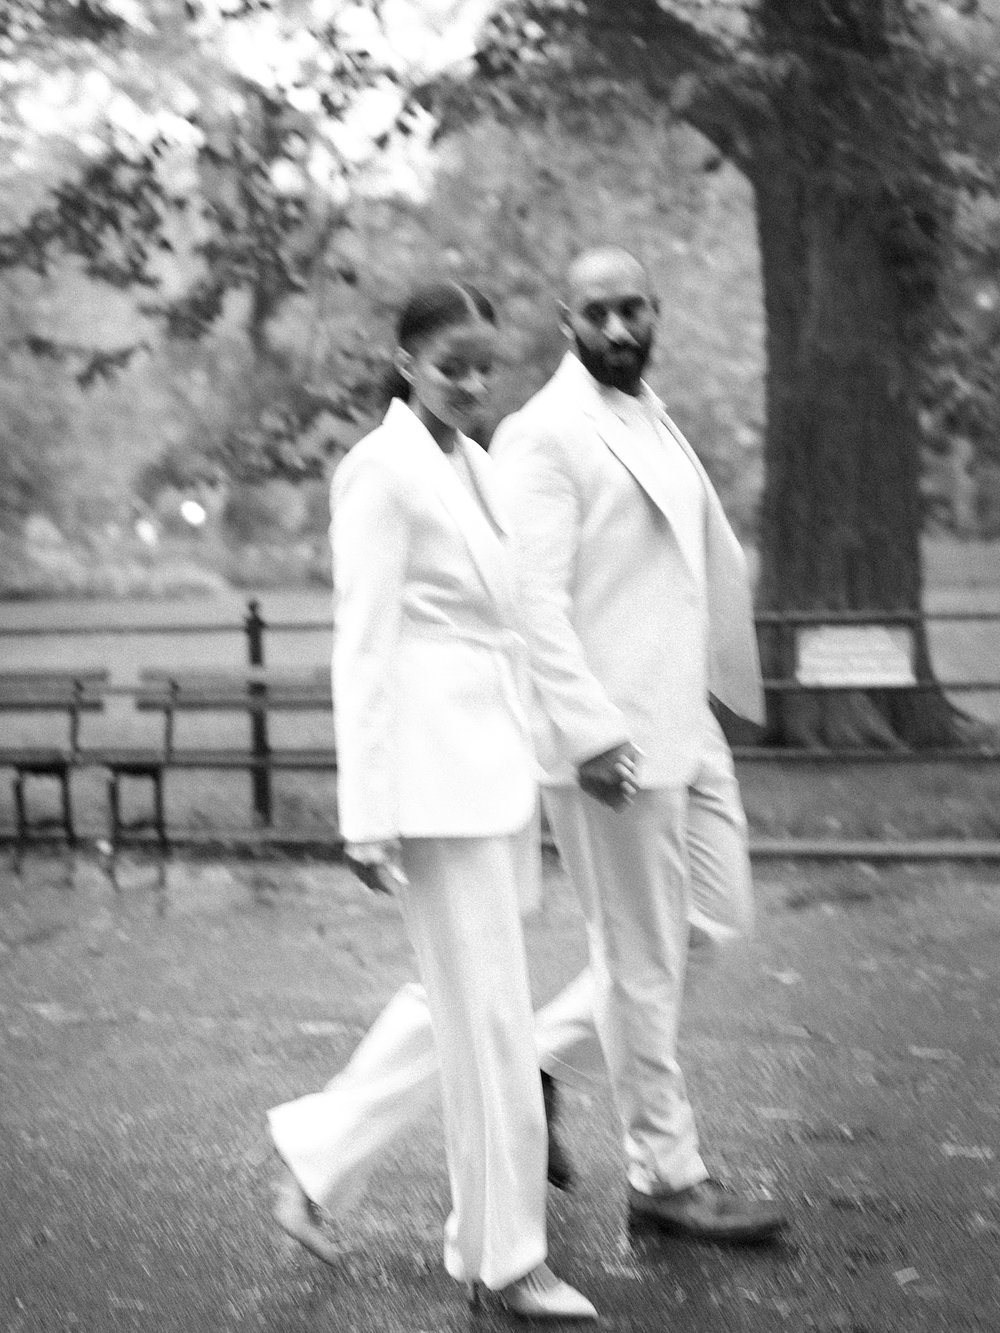 husband and wife hold hands walking through Central Park in the rain